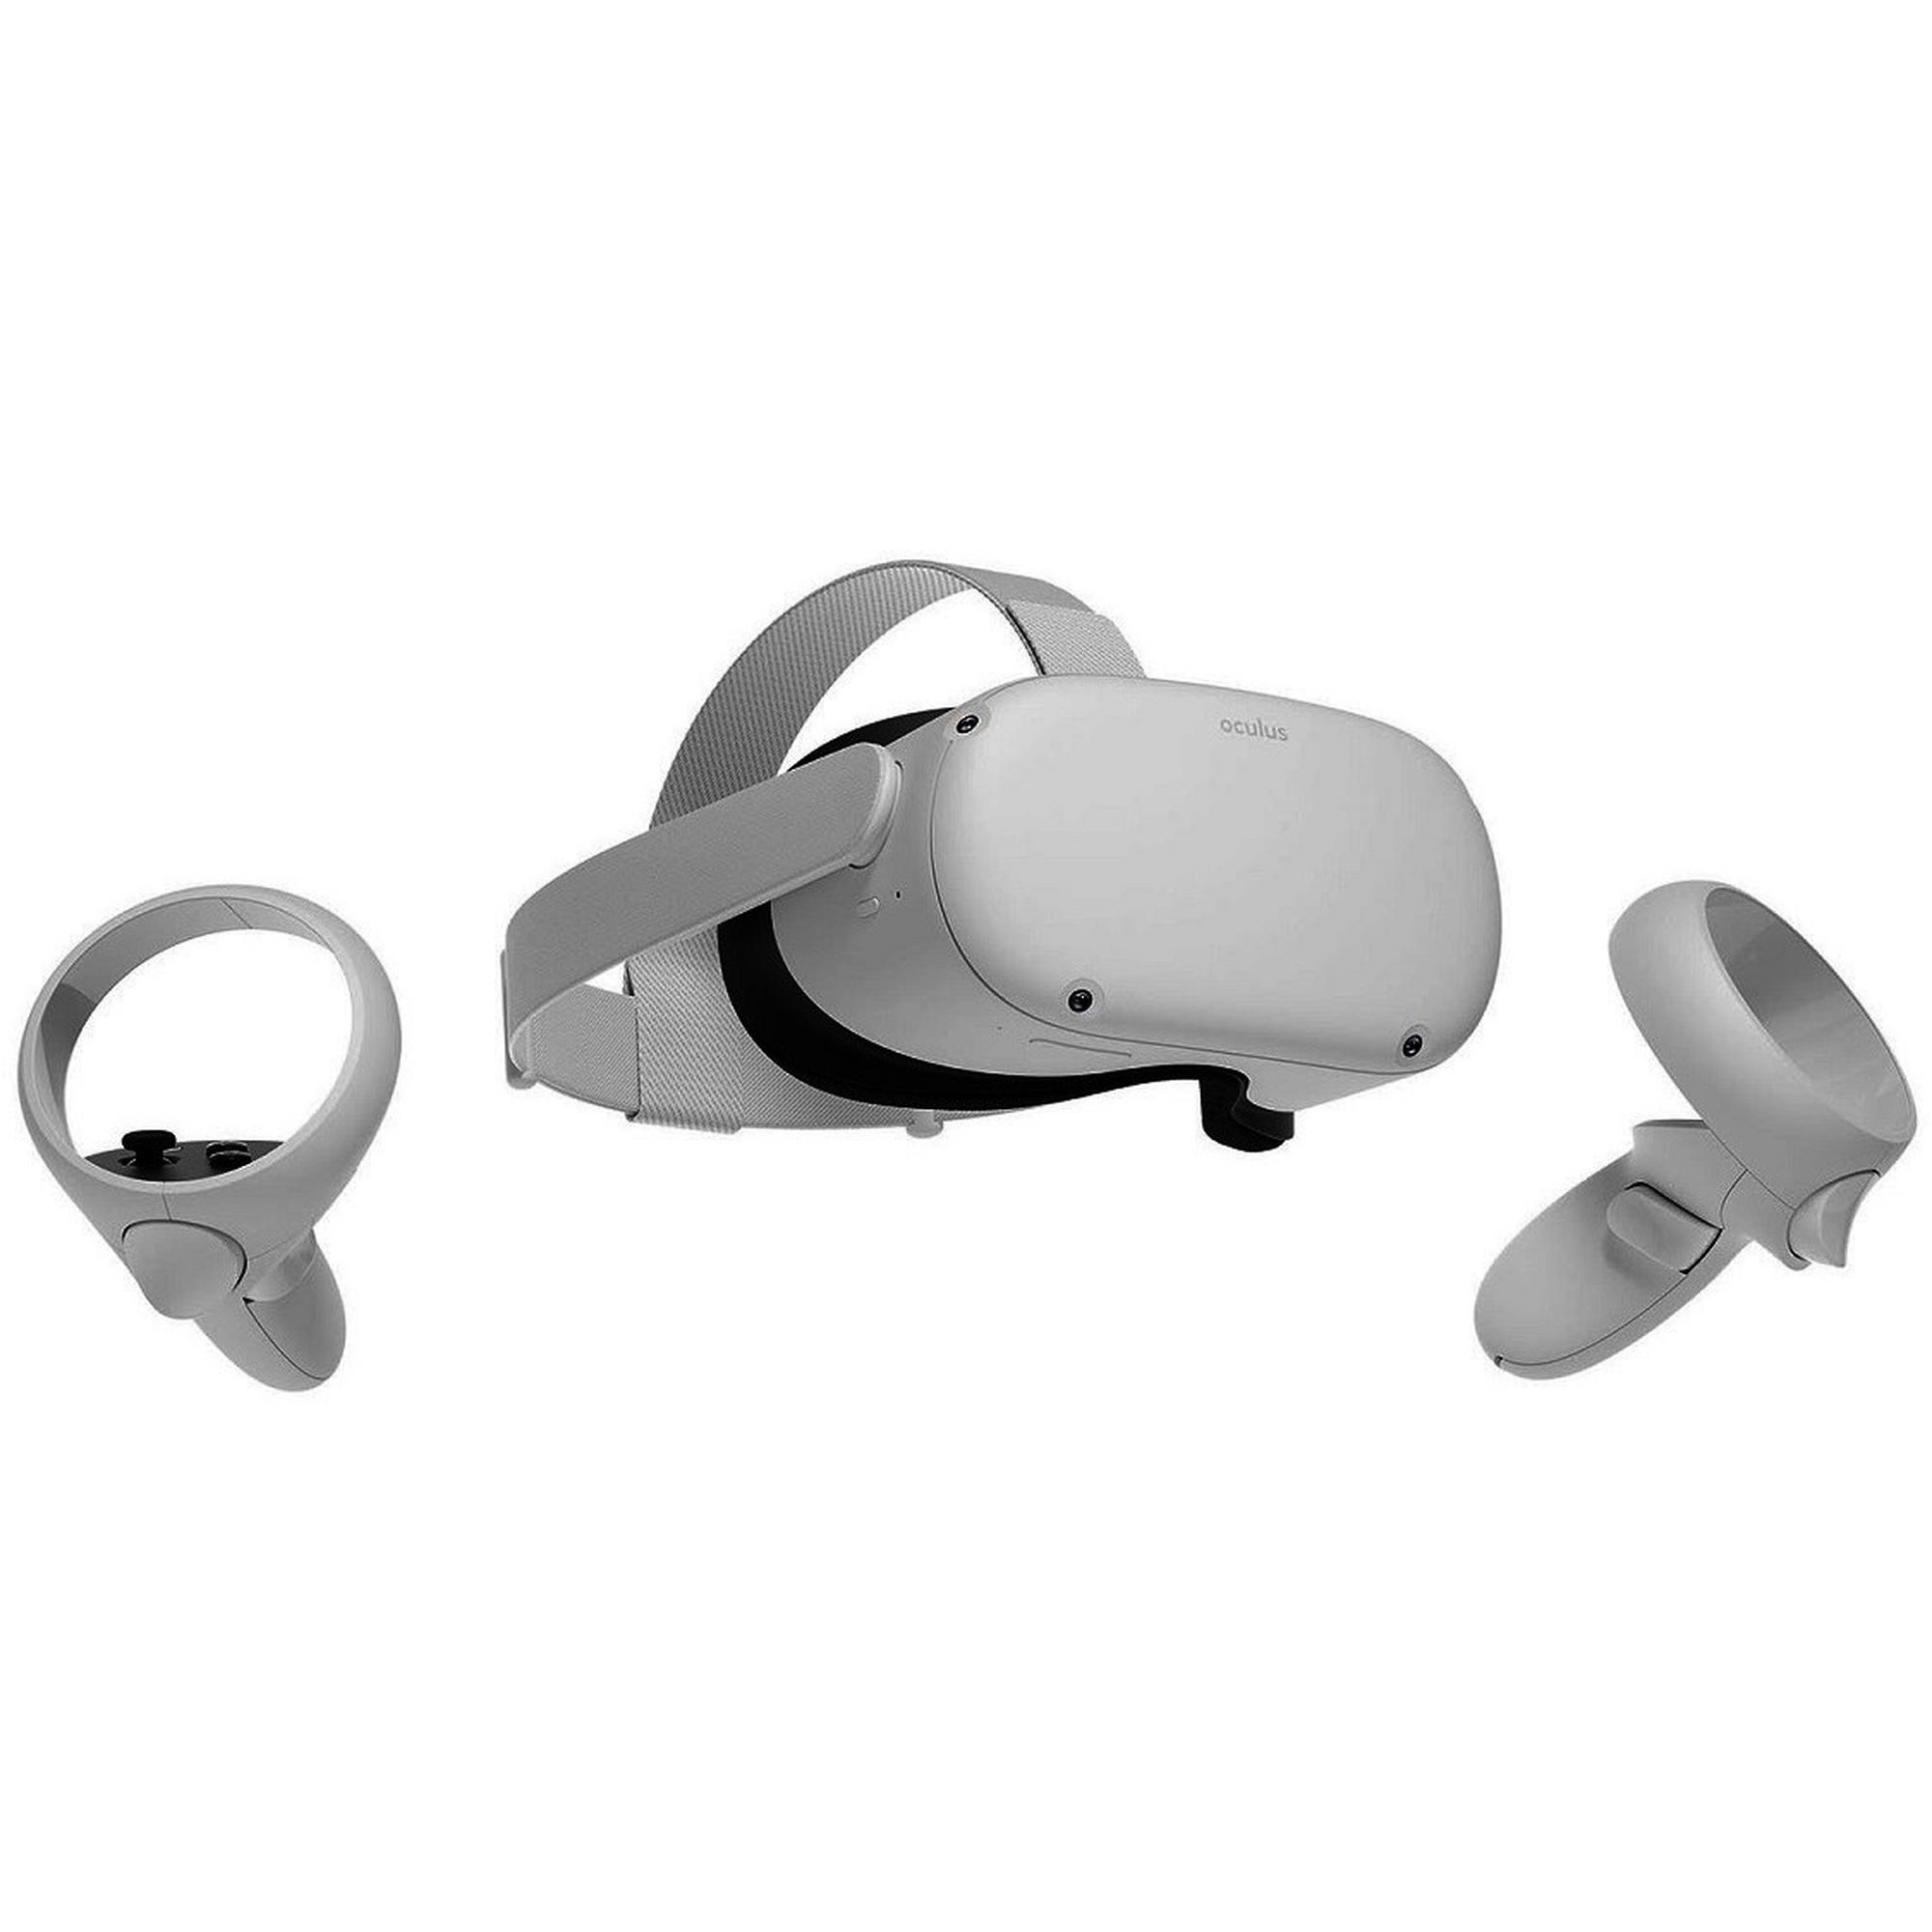 Rent to Own Meta Meta Quest 2 AIO VR Headset w/ 128GB at Aaron's today!